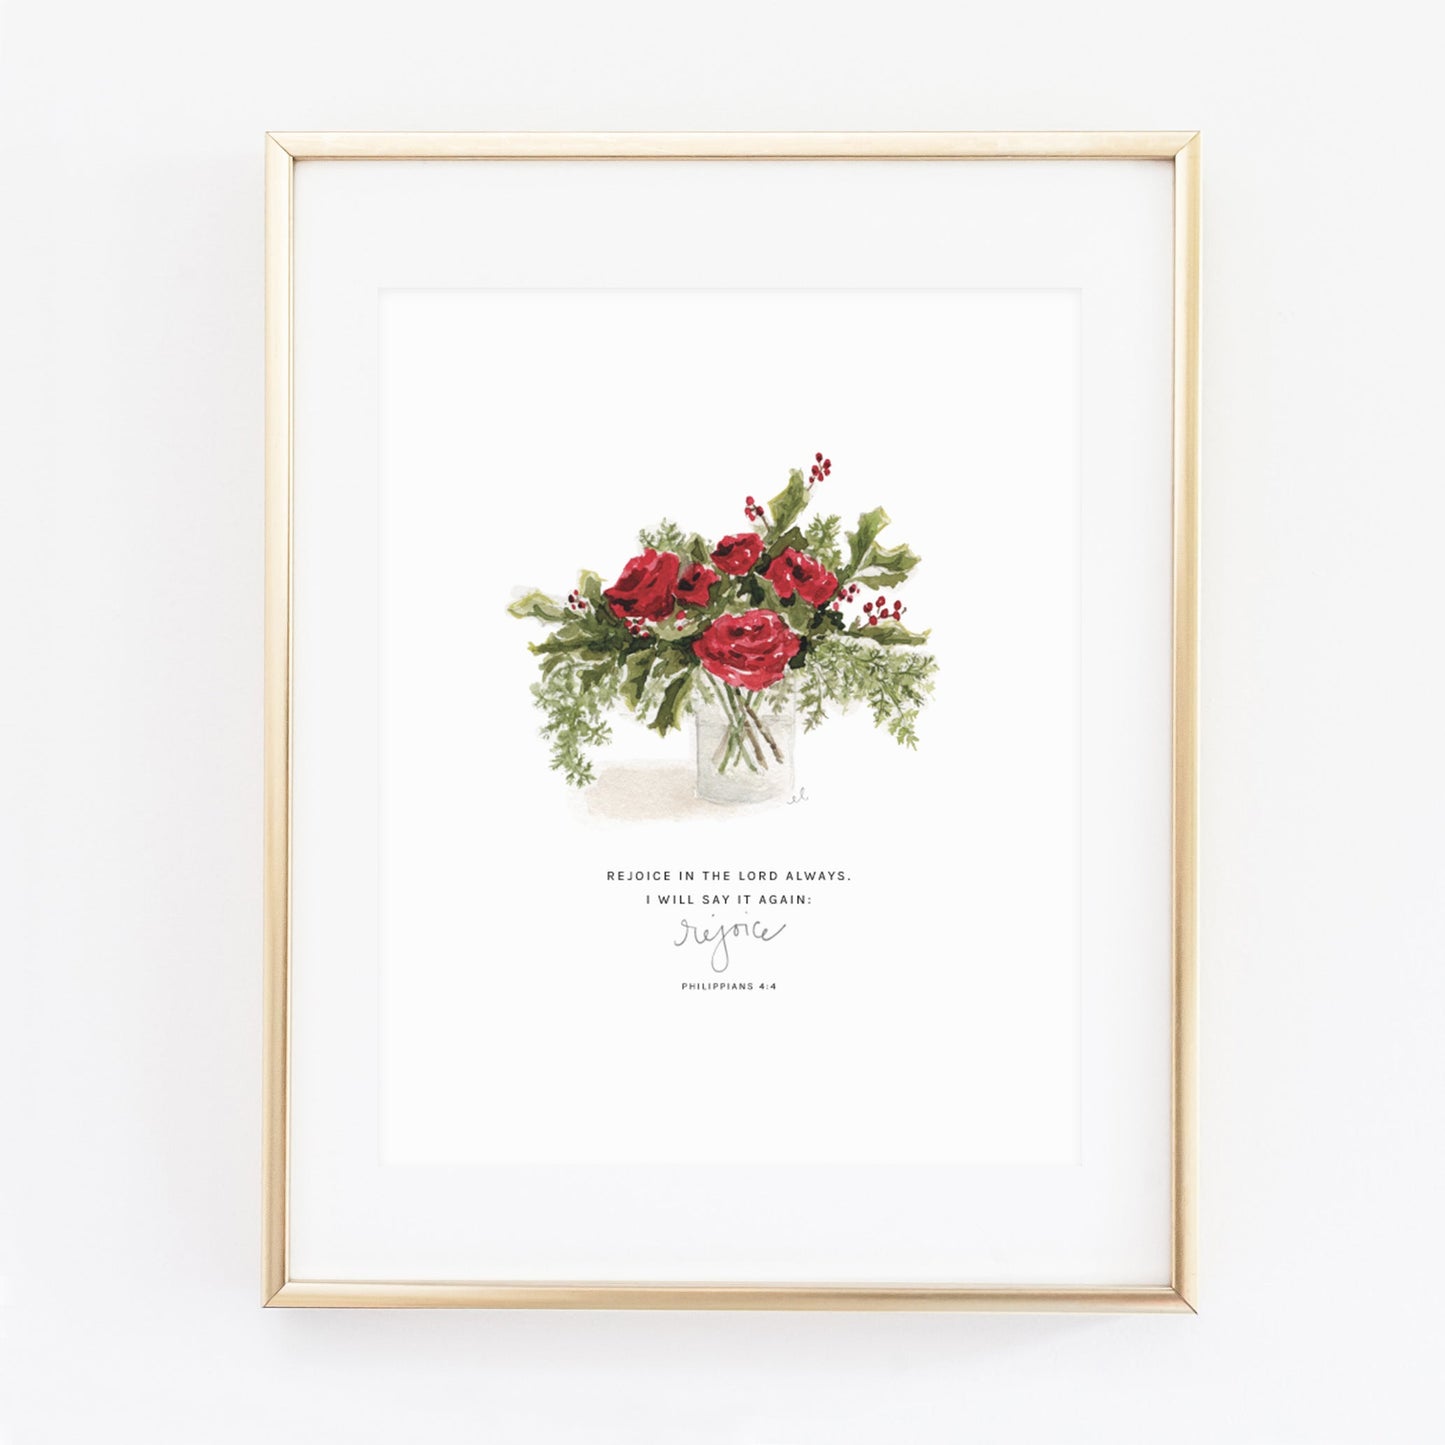 holly & roses philippians 4:4 scripture print